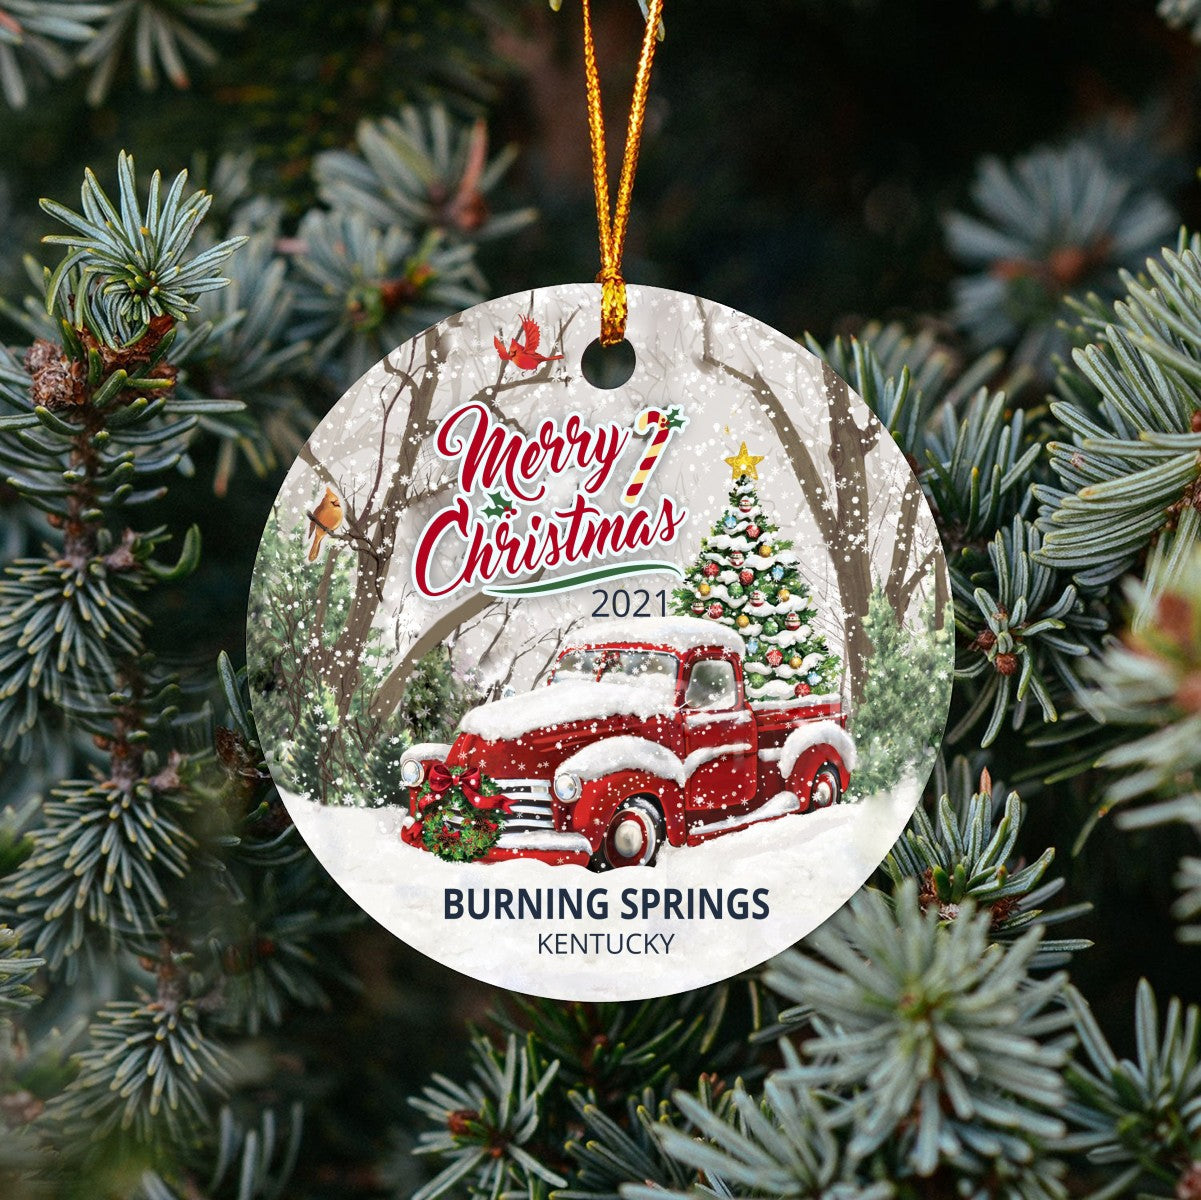 Christmas Tree Ornaments Burning Springs - Ornament With Name City, State Burning Springs Kentucky KY Ornament - Red Truck Xmas Ornaments 3'' Plastic Gift For Family, Friend And Housewarming